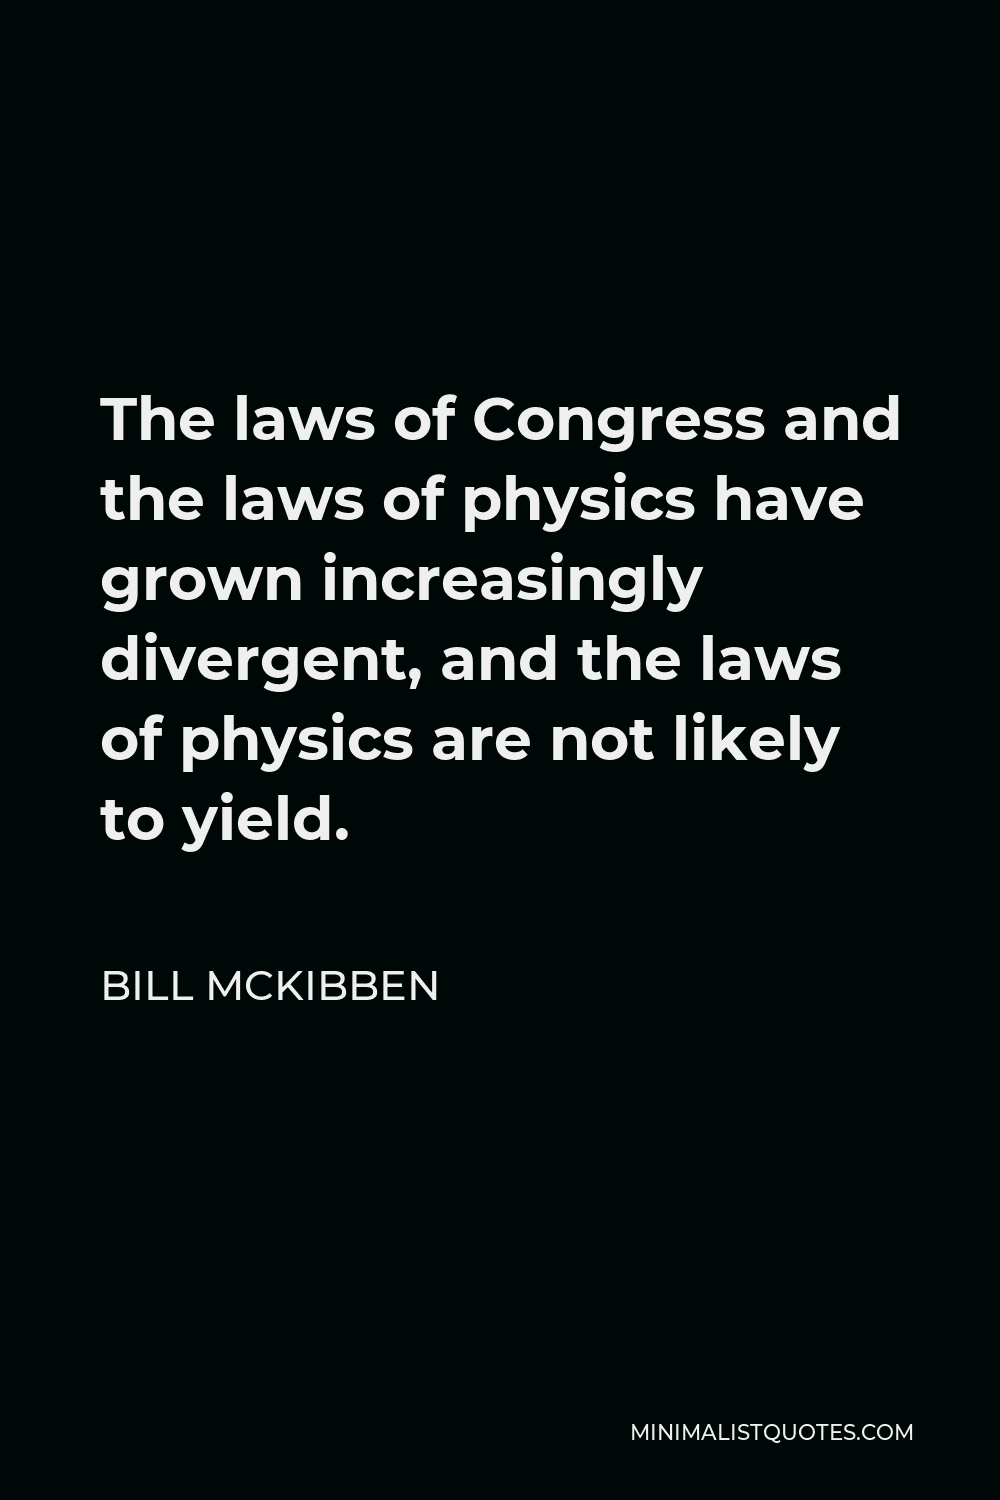 Bill McKibben Quote - The laws of Congress and the laws of physics have grown increasingly divergent, and the laws of physics are not likely to yield.